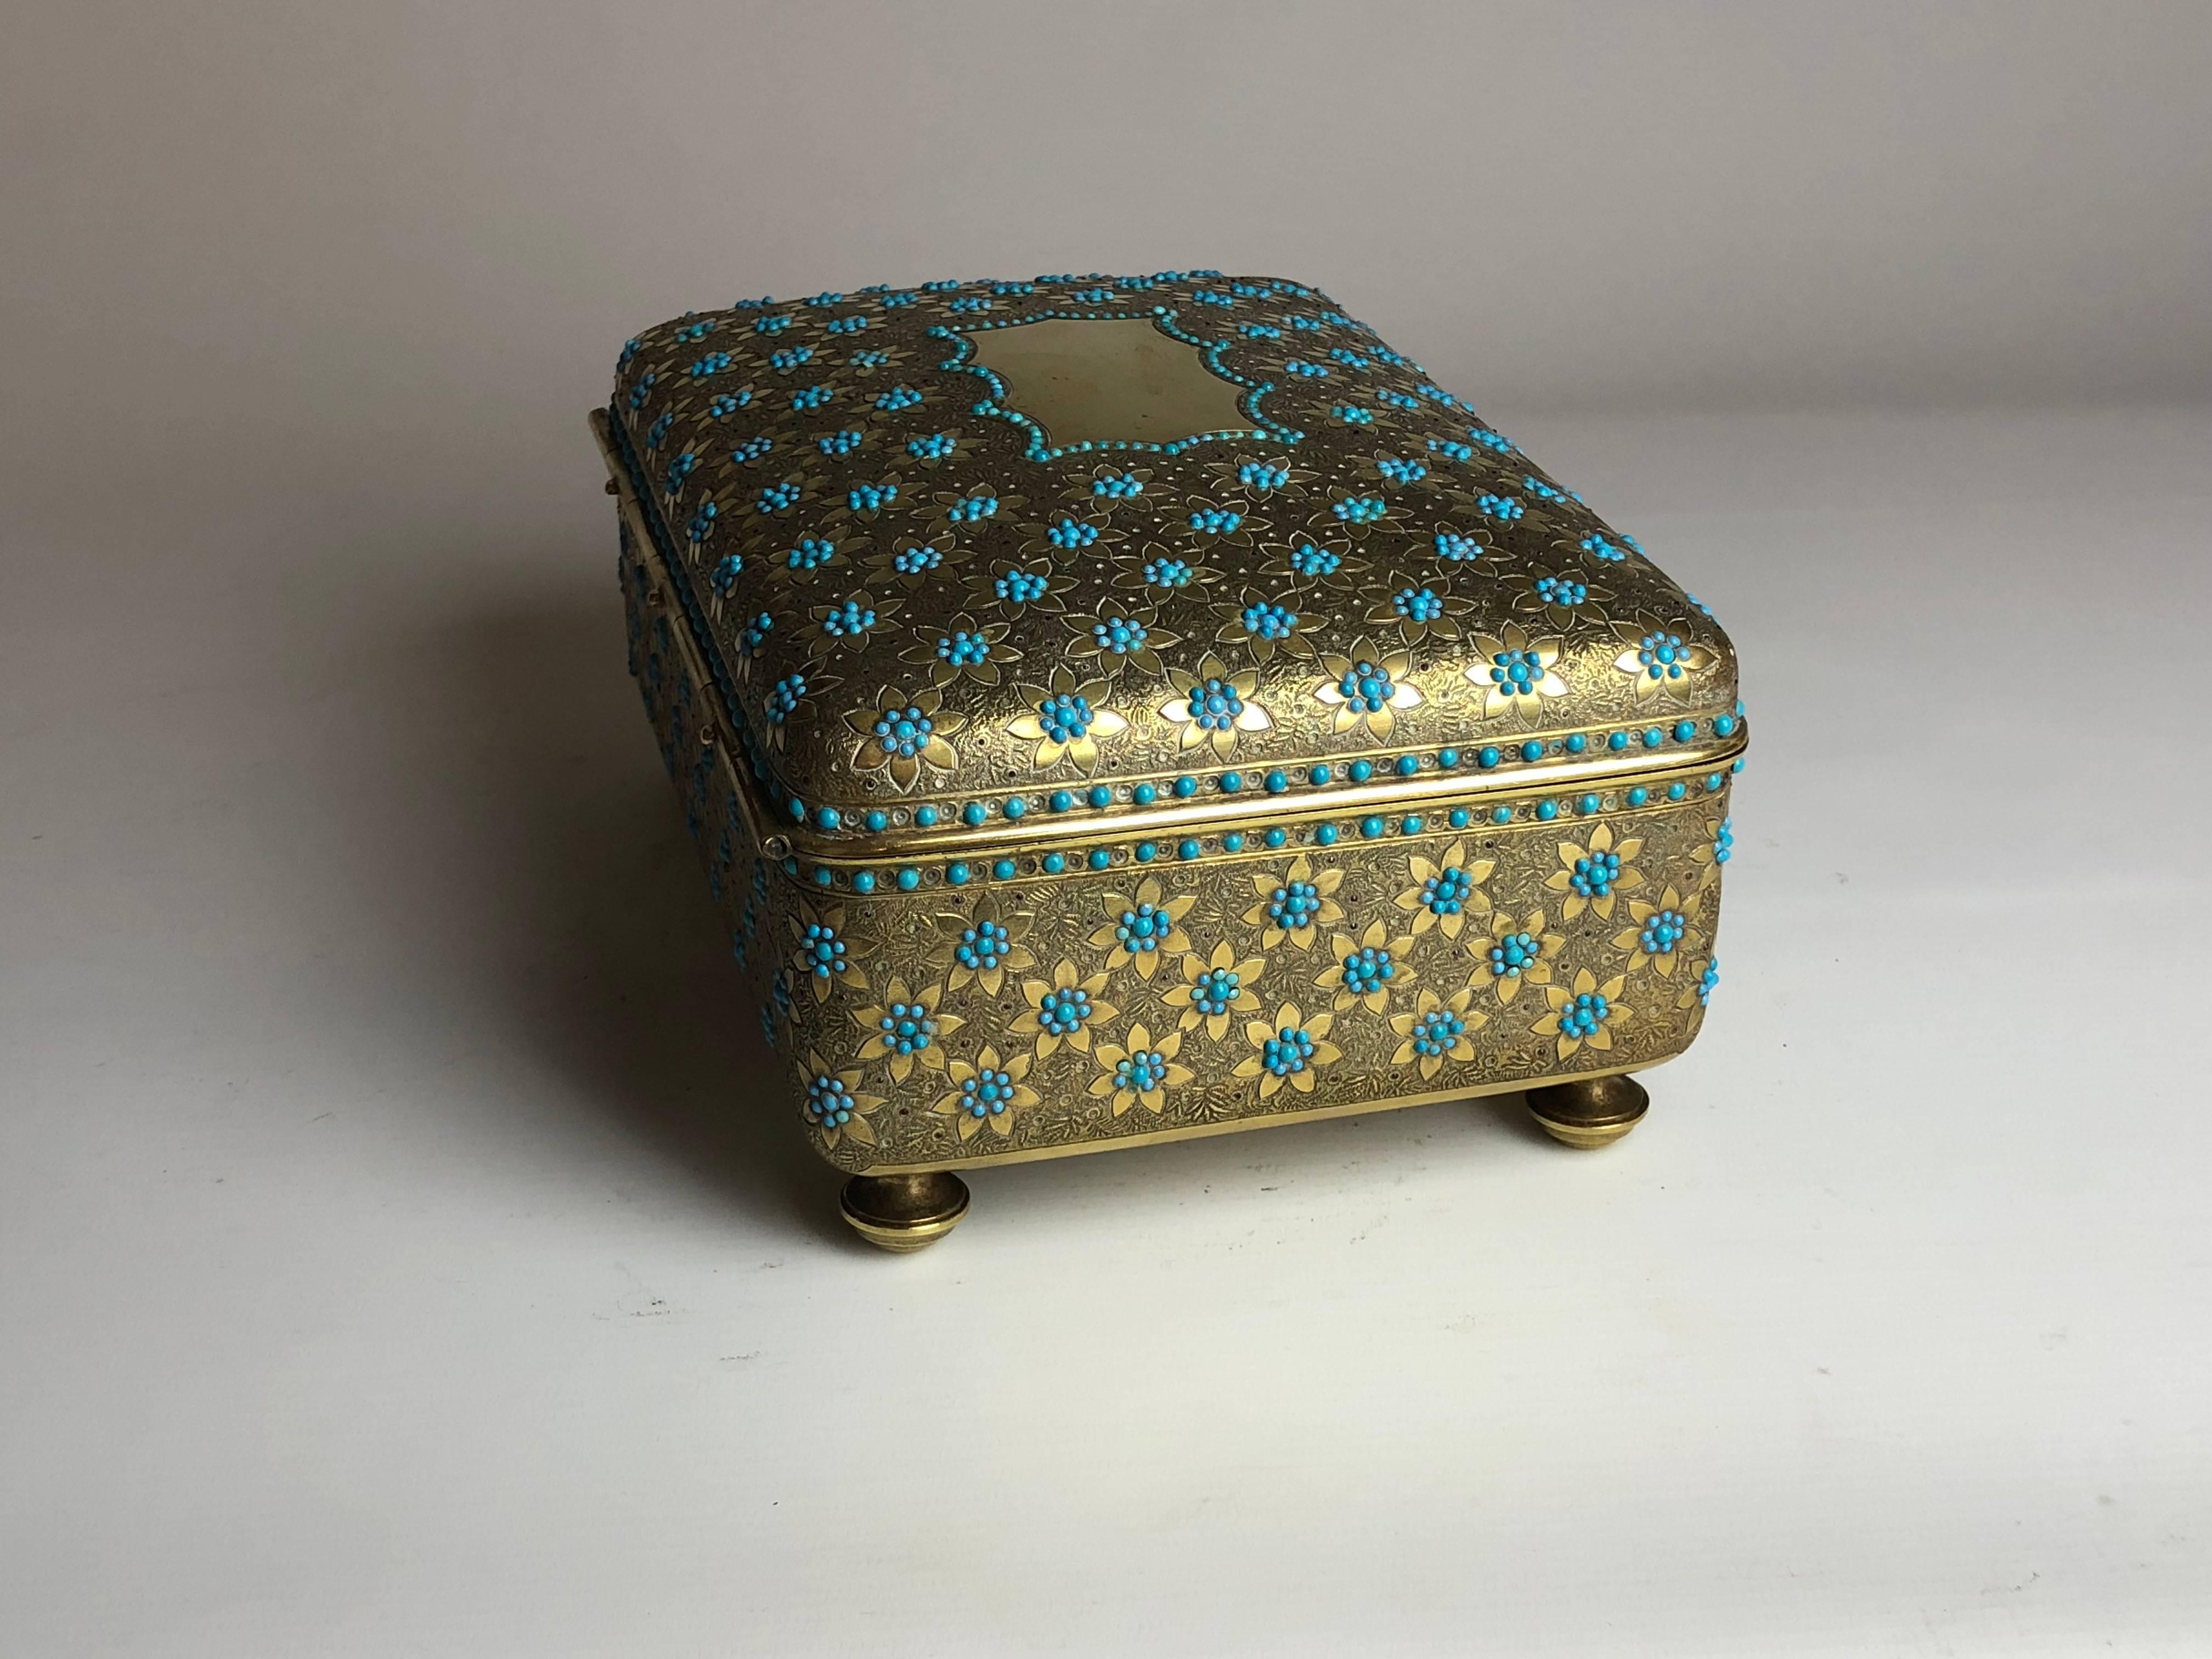 French 19th Century Ormolu Box Inlaid with Turquoise